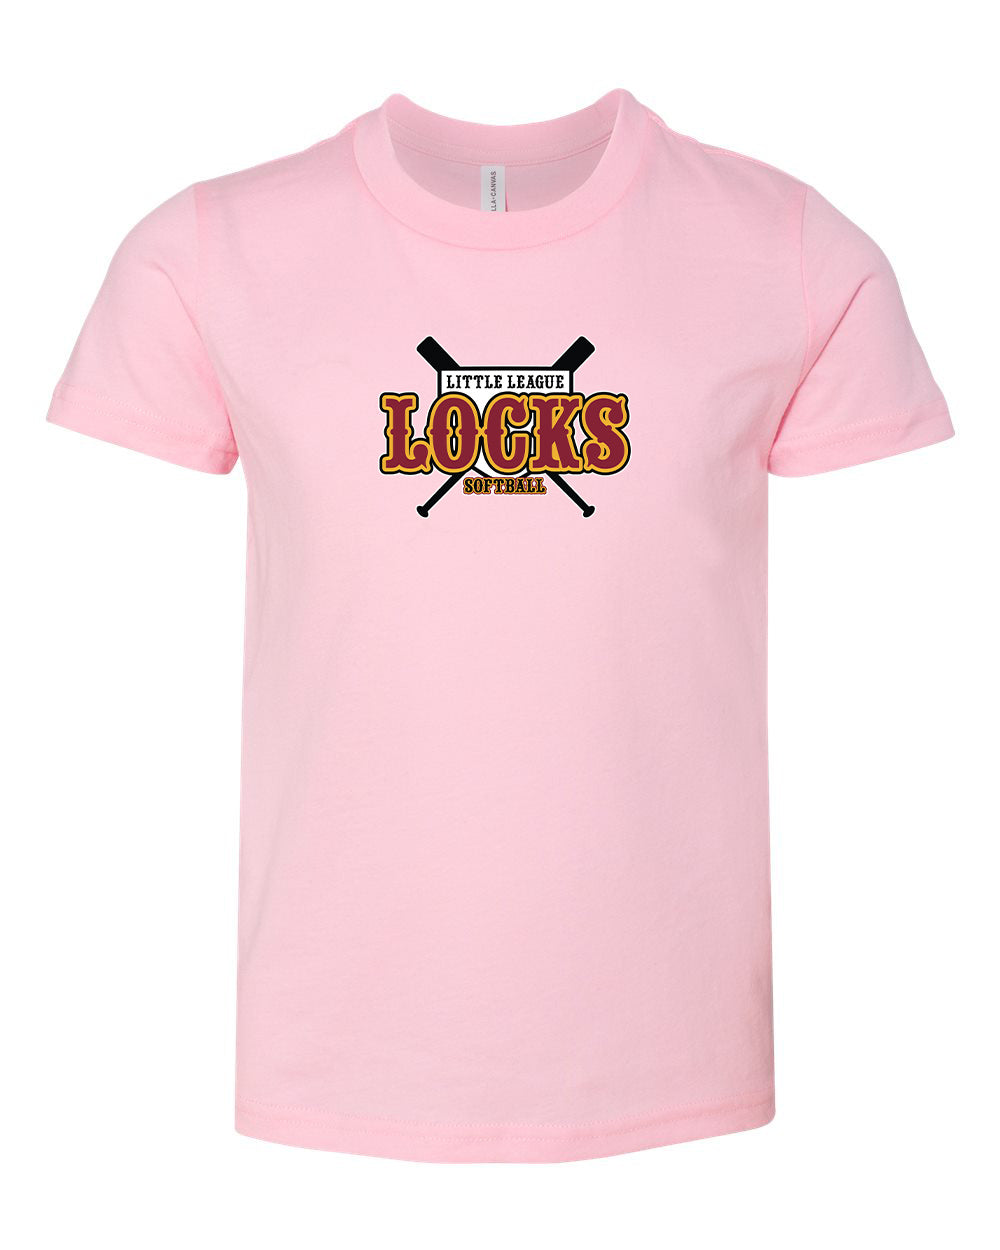 Locks Youth T-shirt "Classic Softball" - 3001Y (color options available)